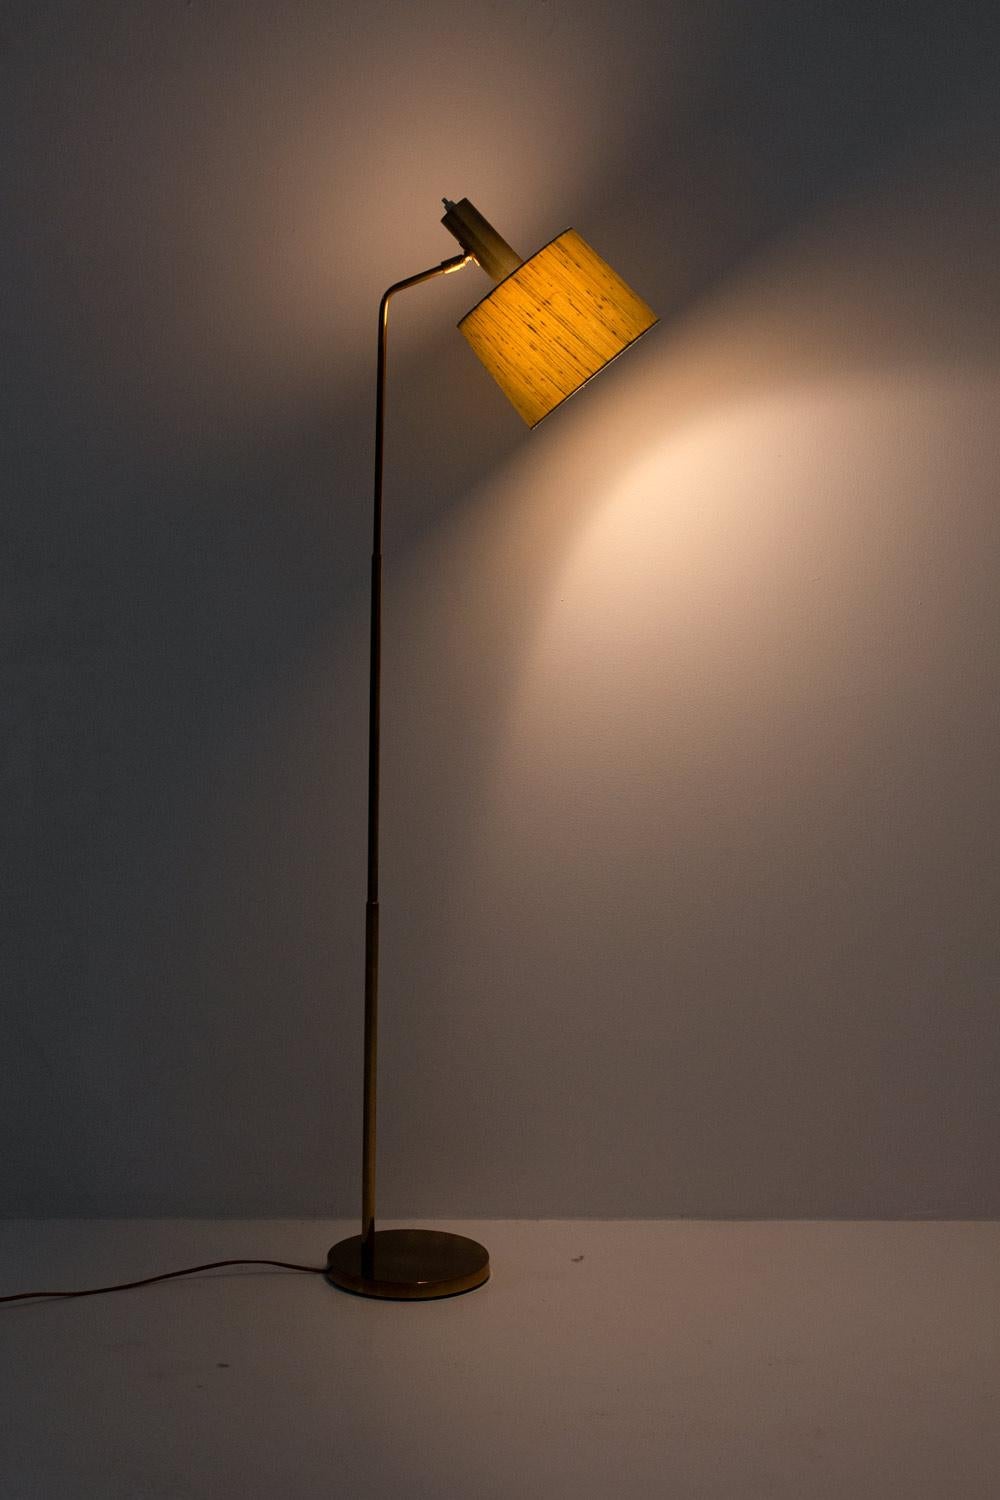 Scandinavian floor lamps model G-03 by Alf Svensson and Yngvar Sandström for Bergboms, Sweden, 1960s.
The lamps are made of solid brass with original fabric shades.

Condition: Very original condition except for some minimal dents and scratches